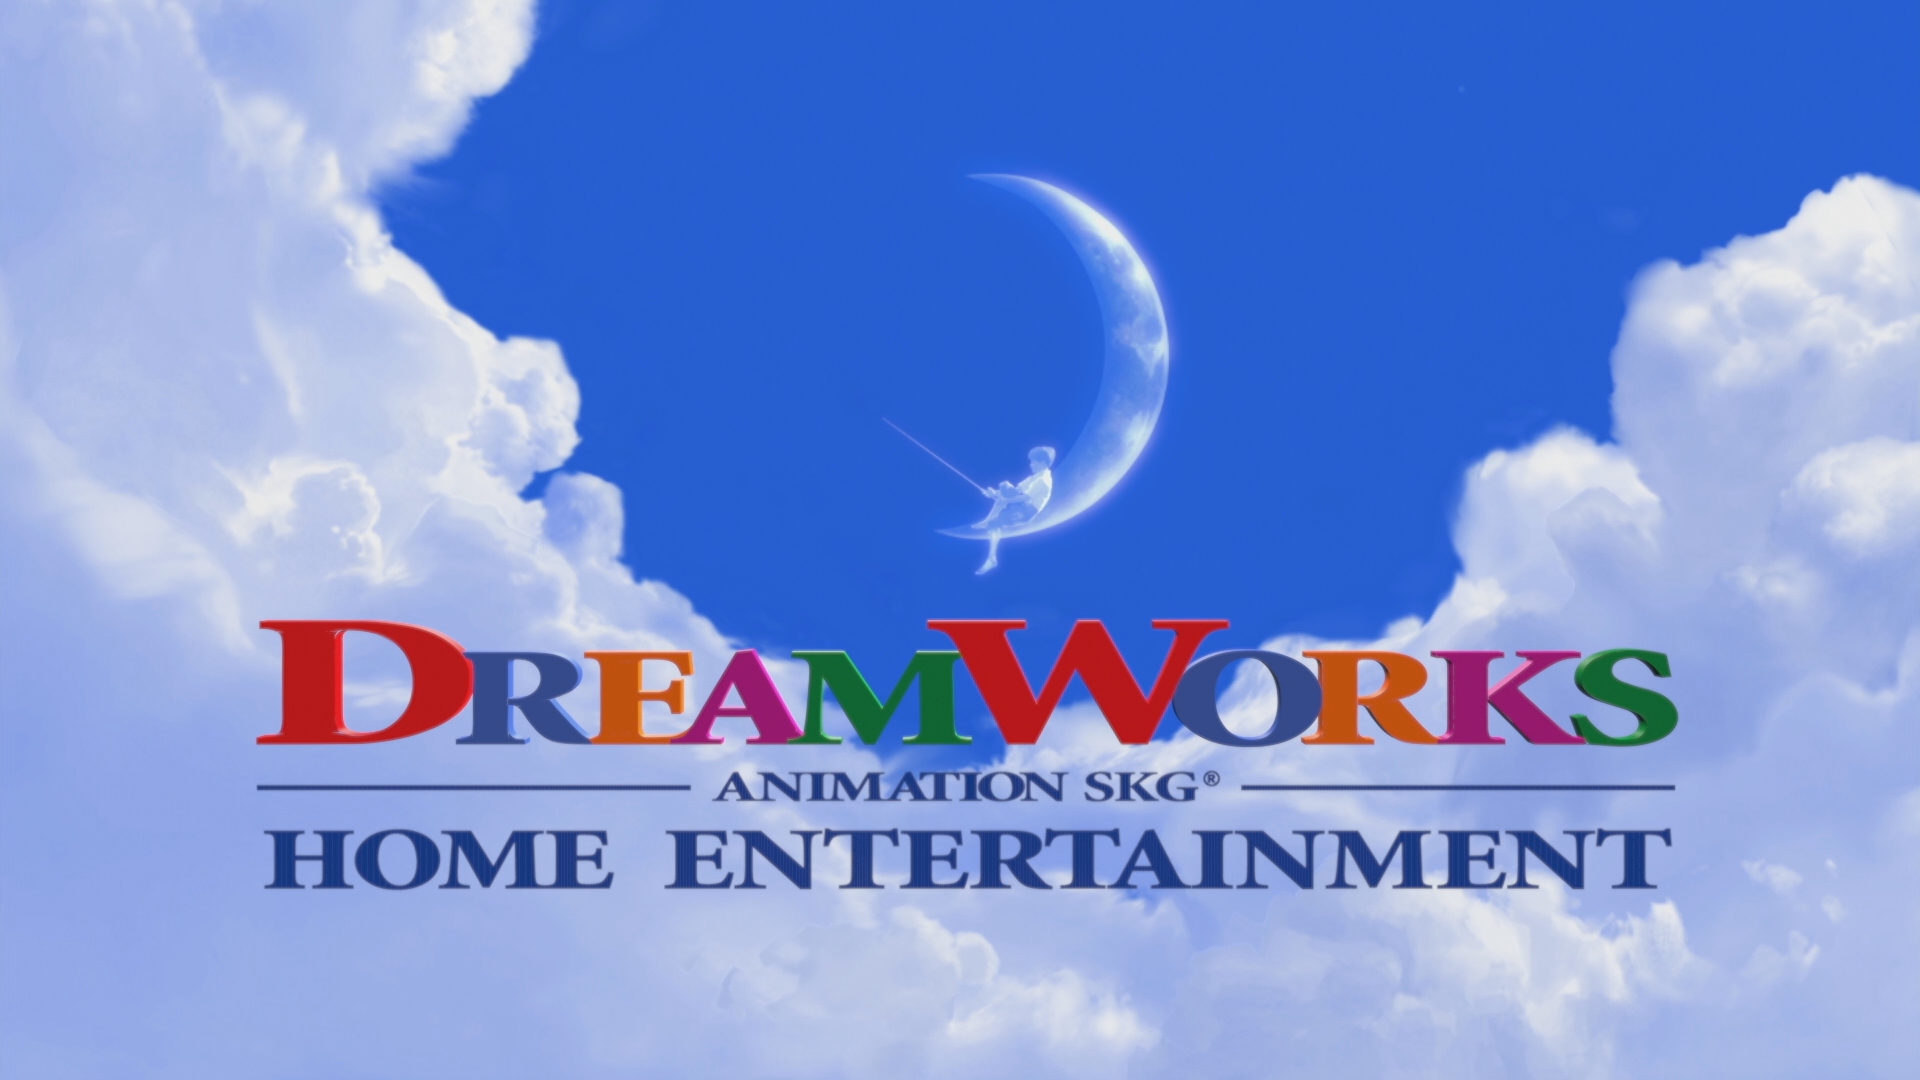 Dreamworks Logo Wallpaper Image Amp Pictures Becuo